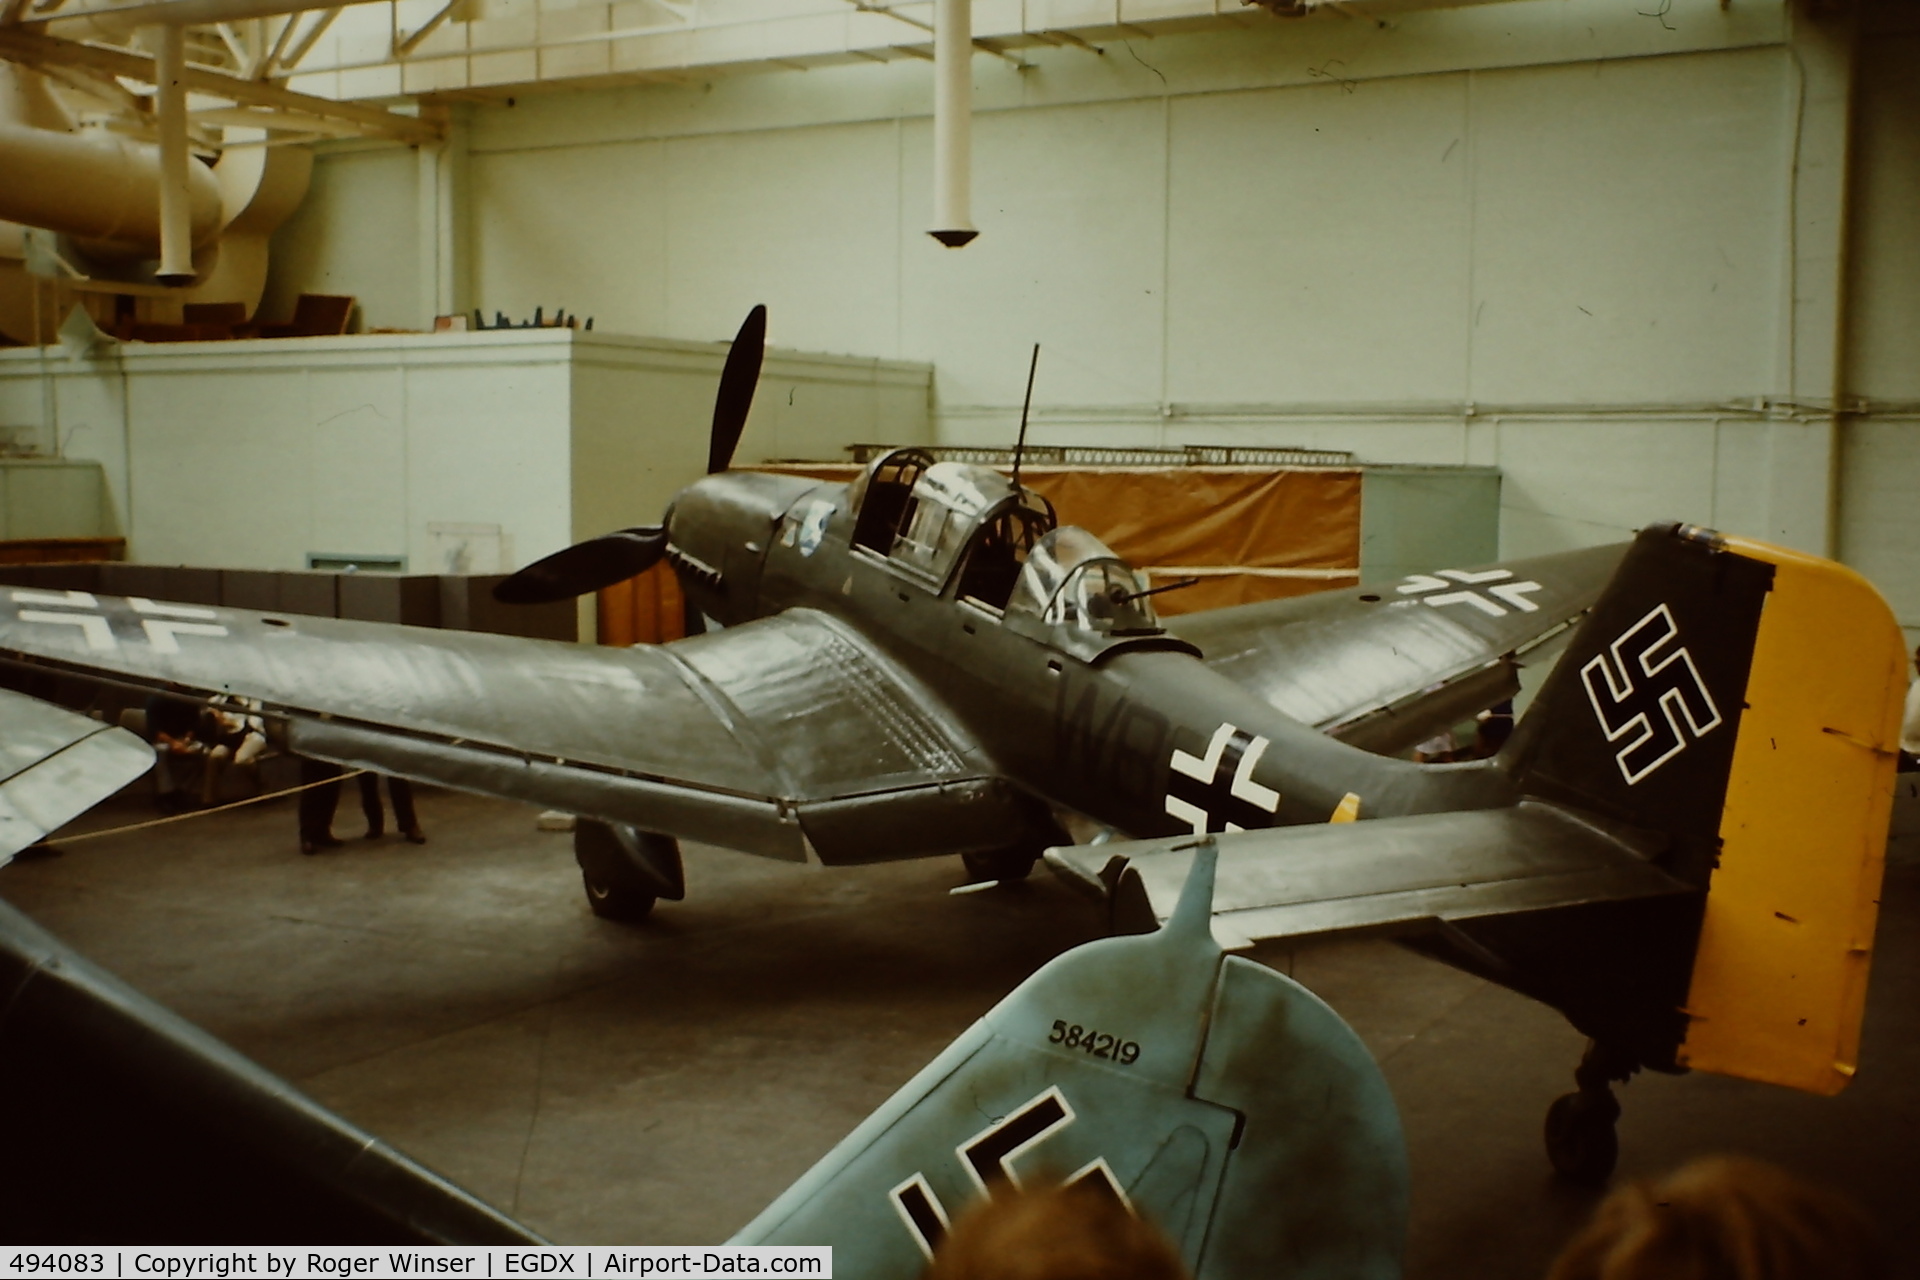 494083, 1941 Junkers Ju-87D Stuka C/N Not found 494083, Coded W8+A. Part of the Historic Aircraft Collection at RAF St Athan, mid-1970's